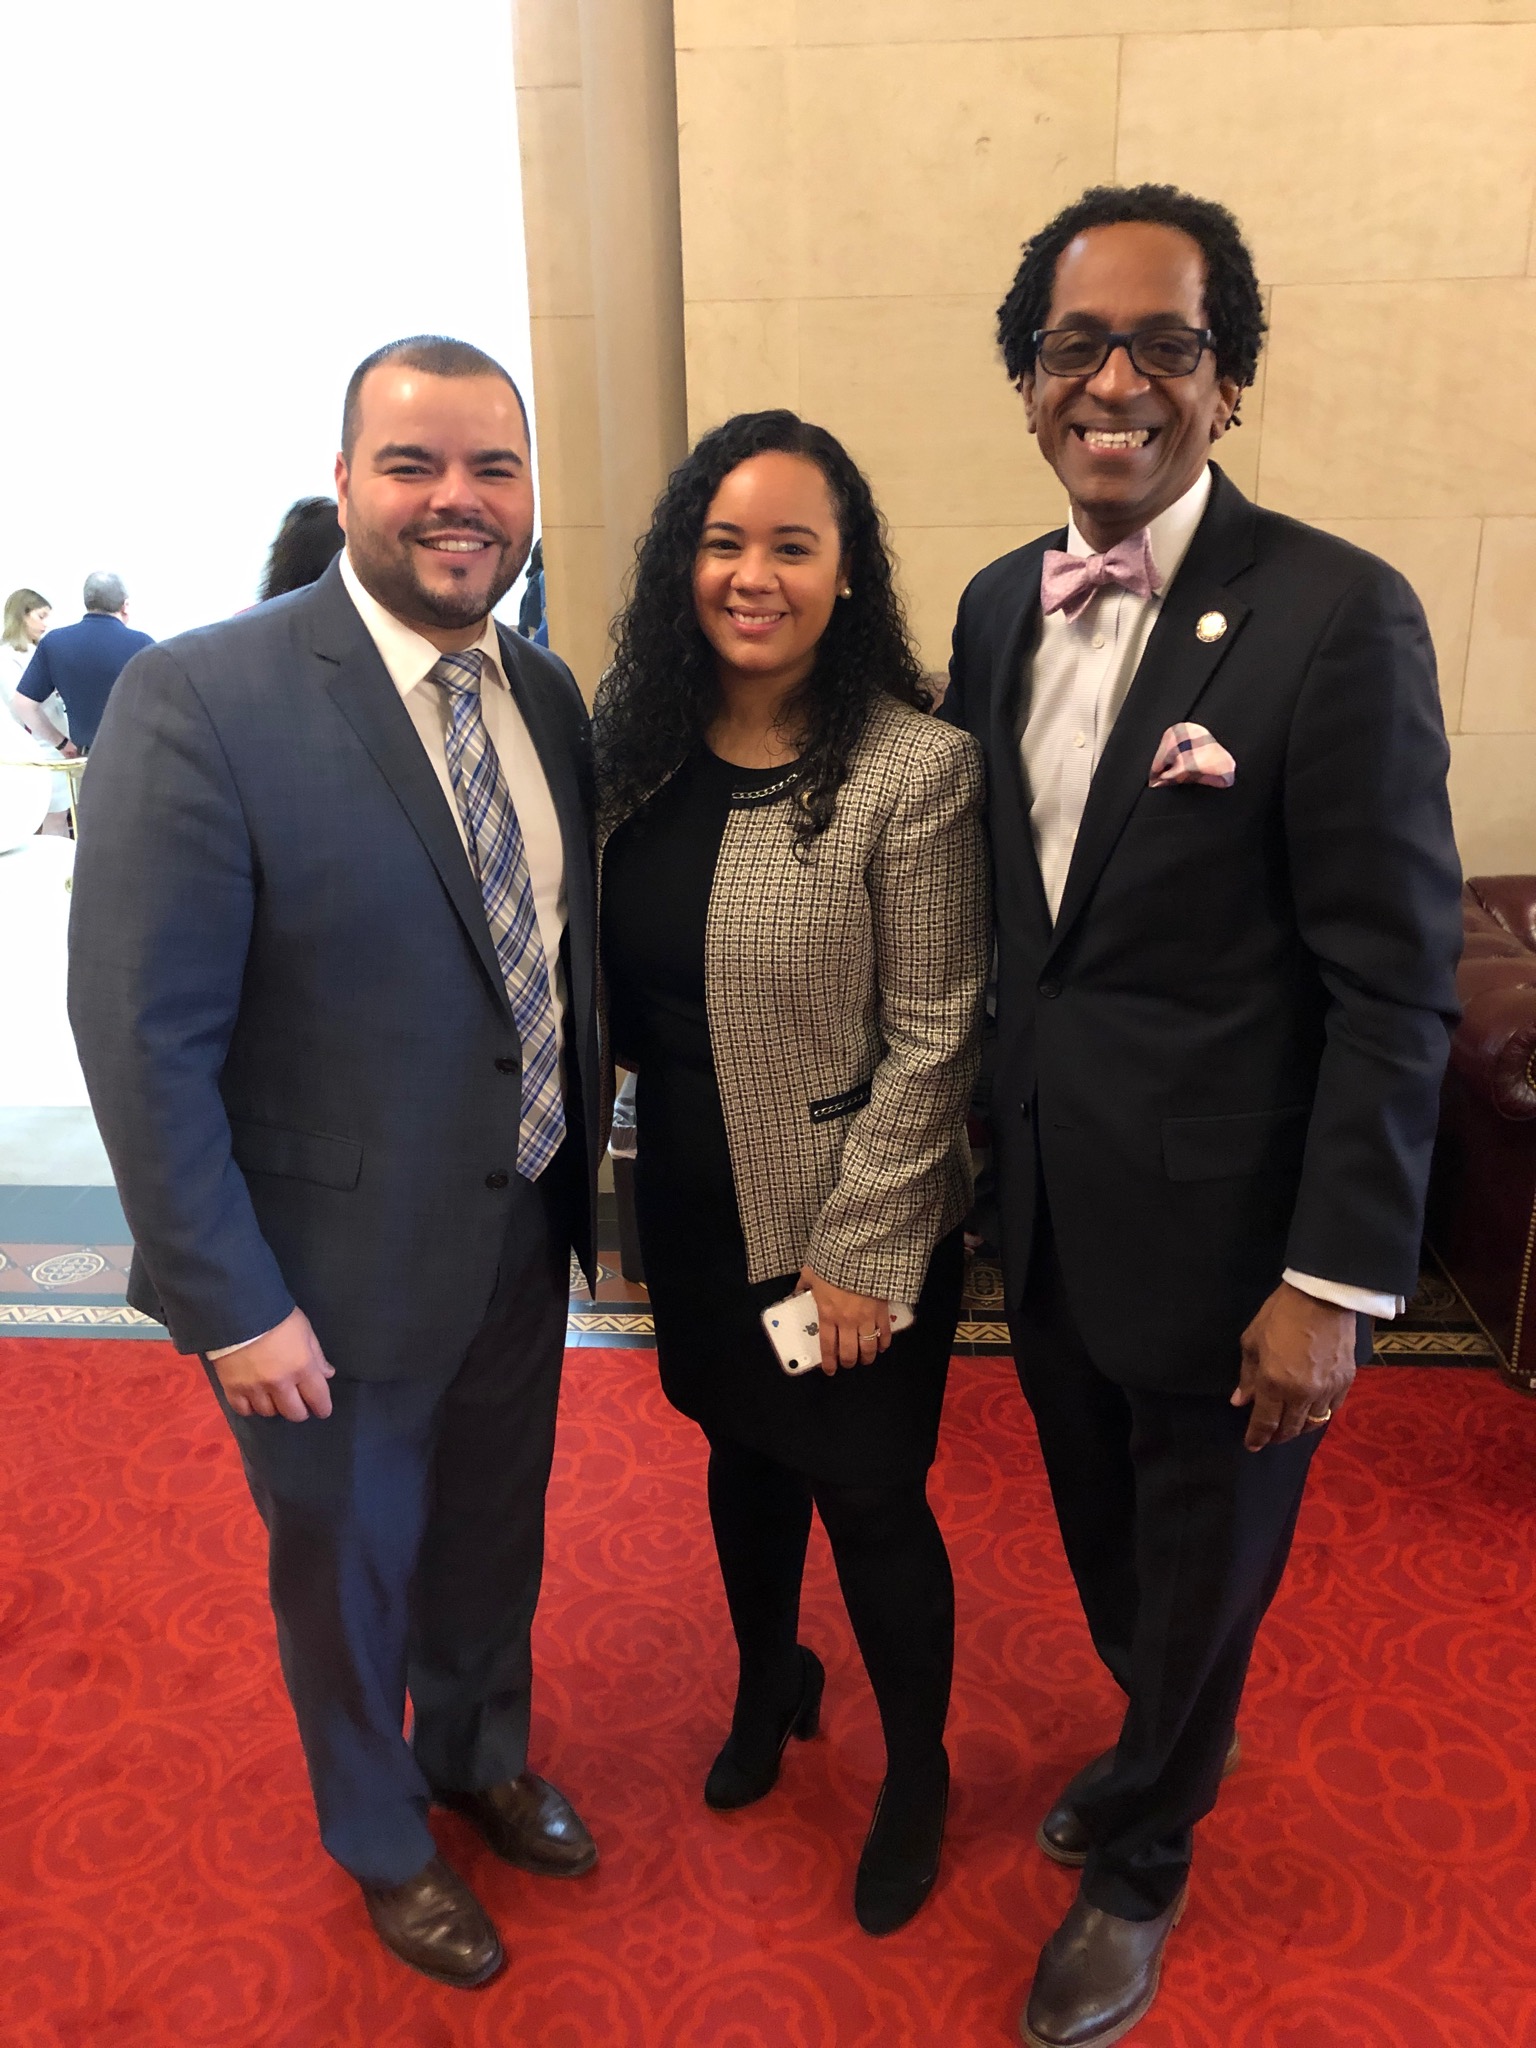 On January 23, 2019, Assemblymember Al Taylor helped to pass the Jose Peralta New York State DREAM Act with Assemblymember Carmen de la Rosa and Assemblymember Marcos Crespo.